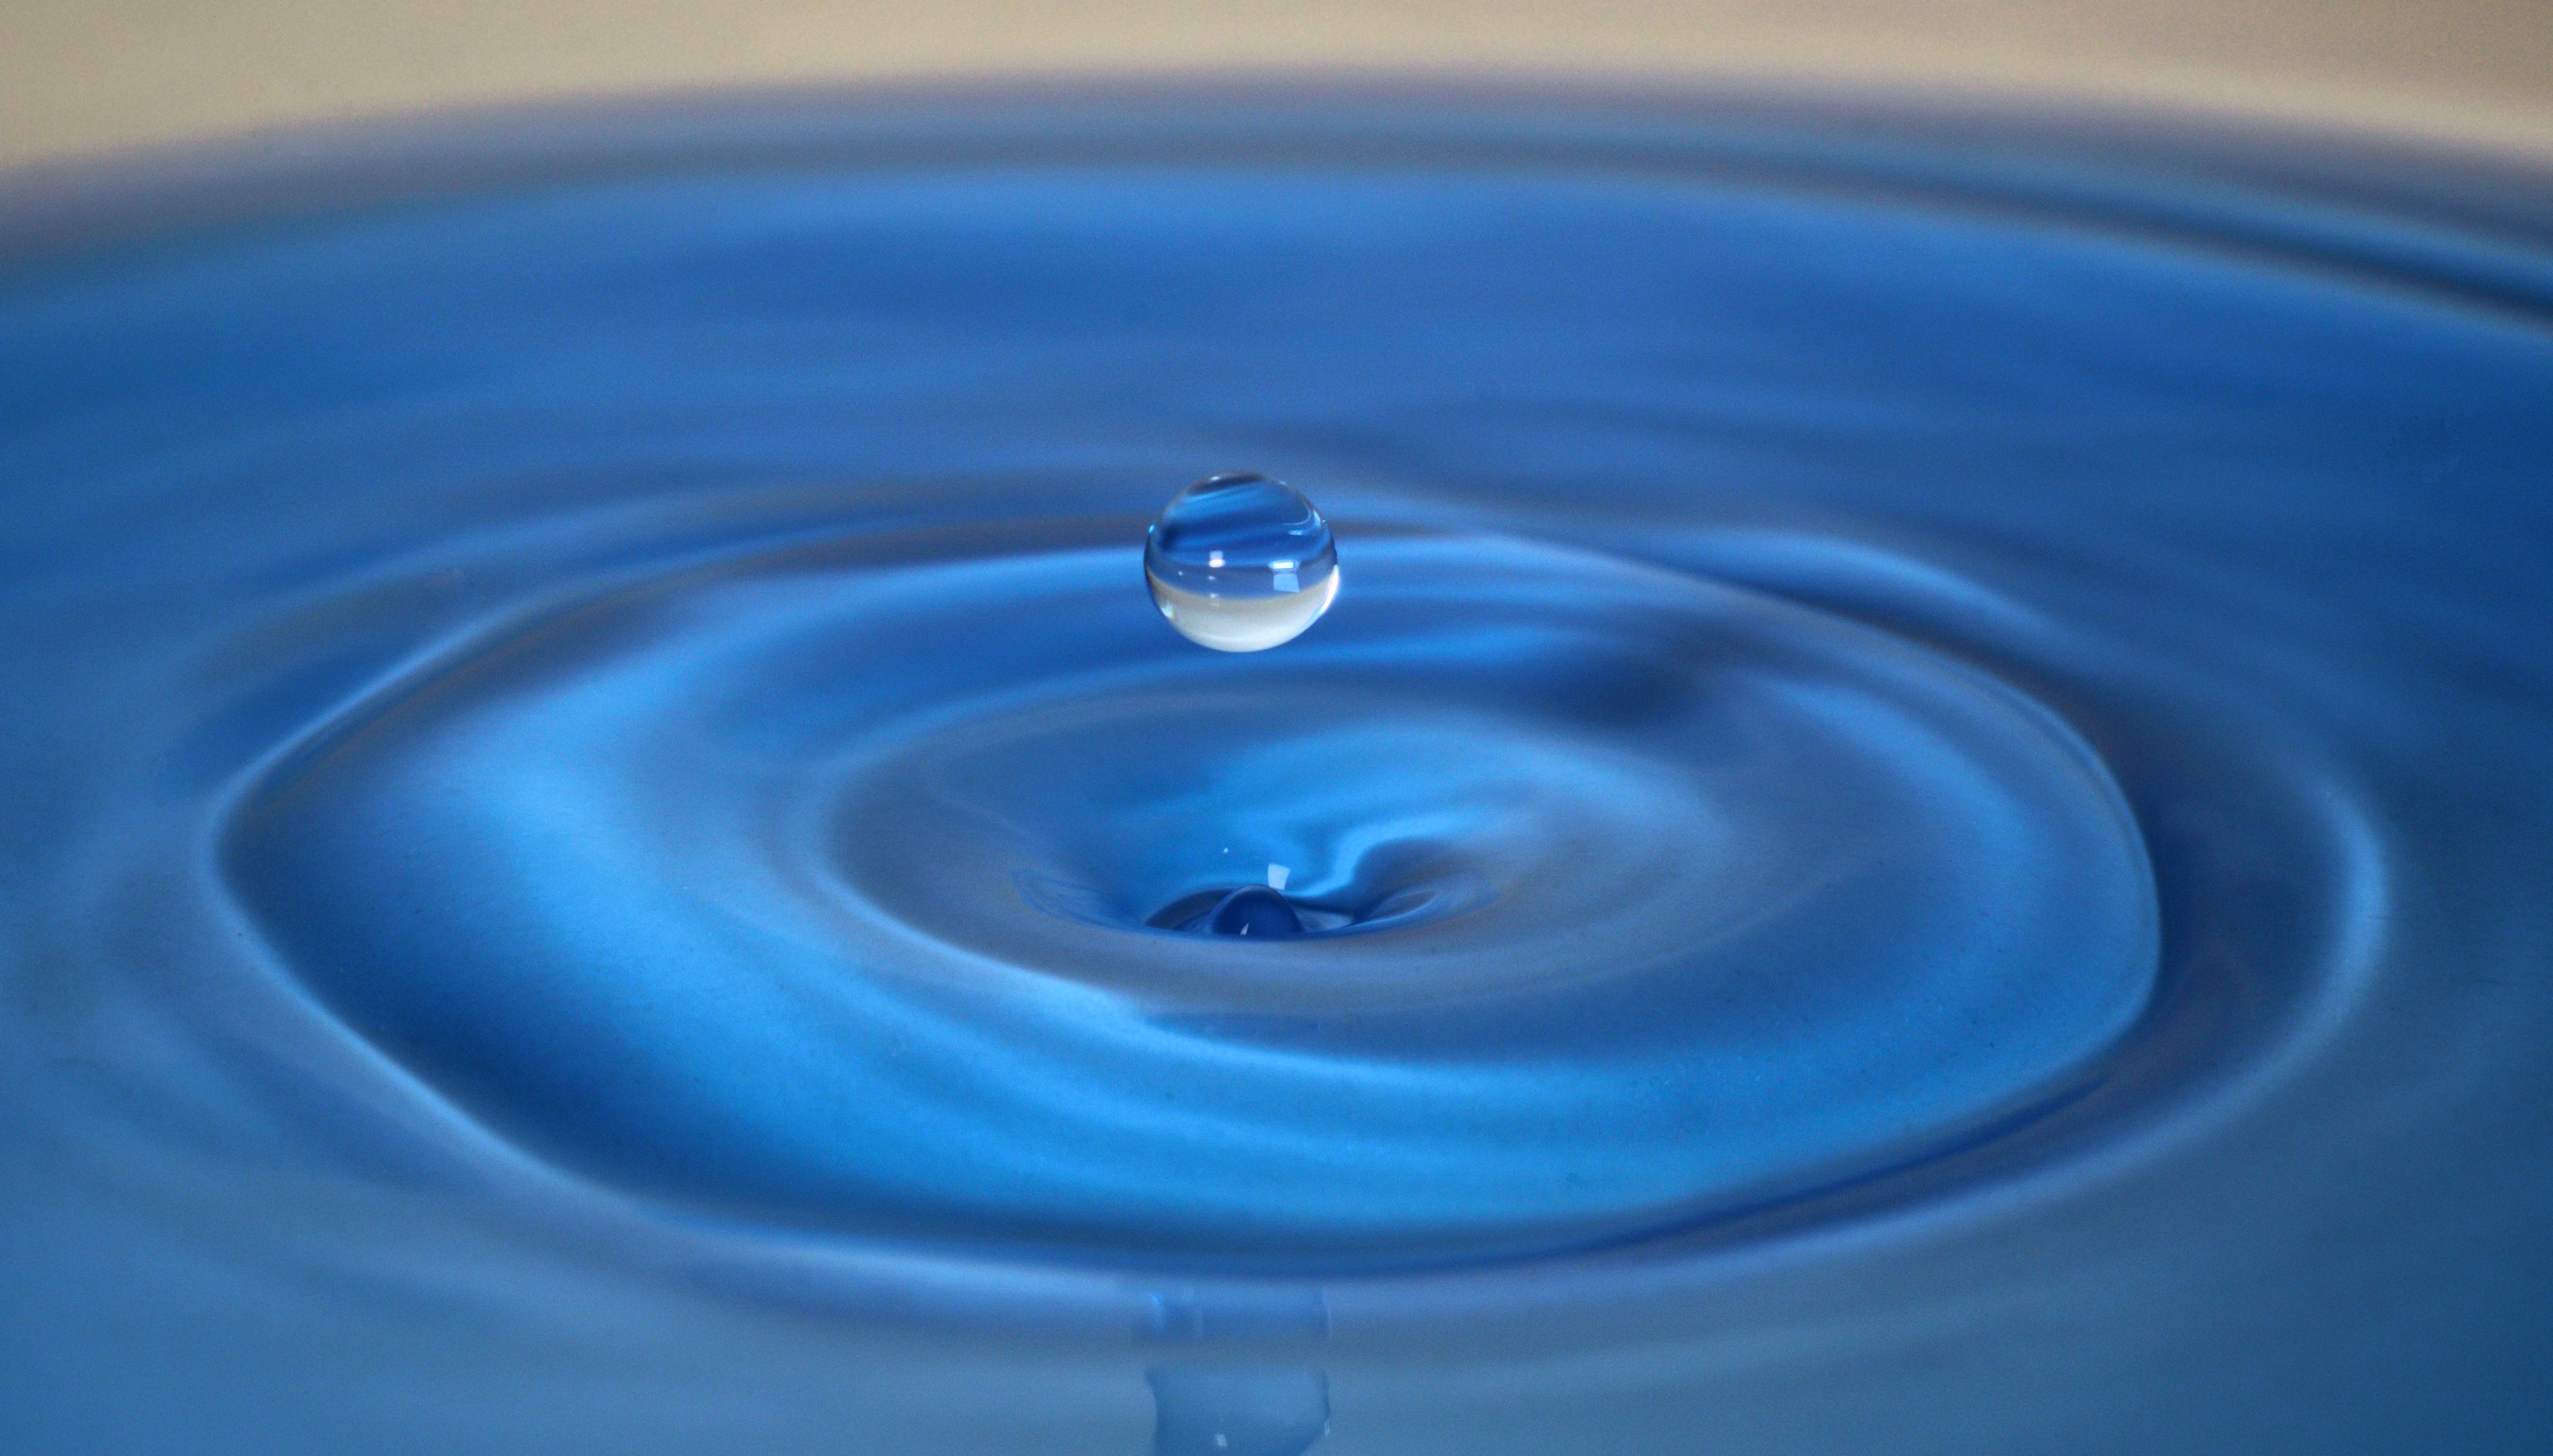 Capillary waves on a water film and pinch-off of a droplet from a Worthington jet, formed during the impact of a water droplet.
